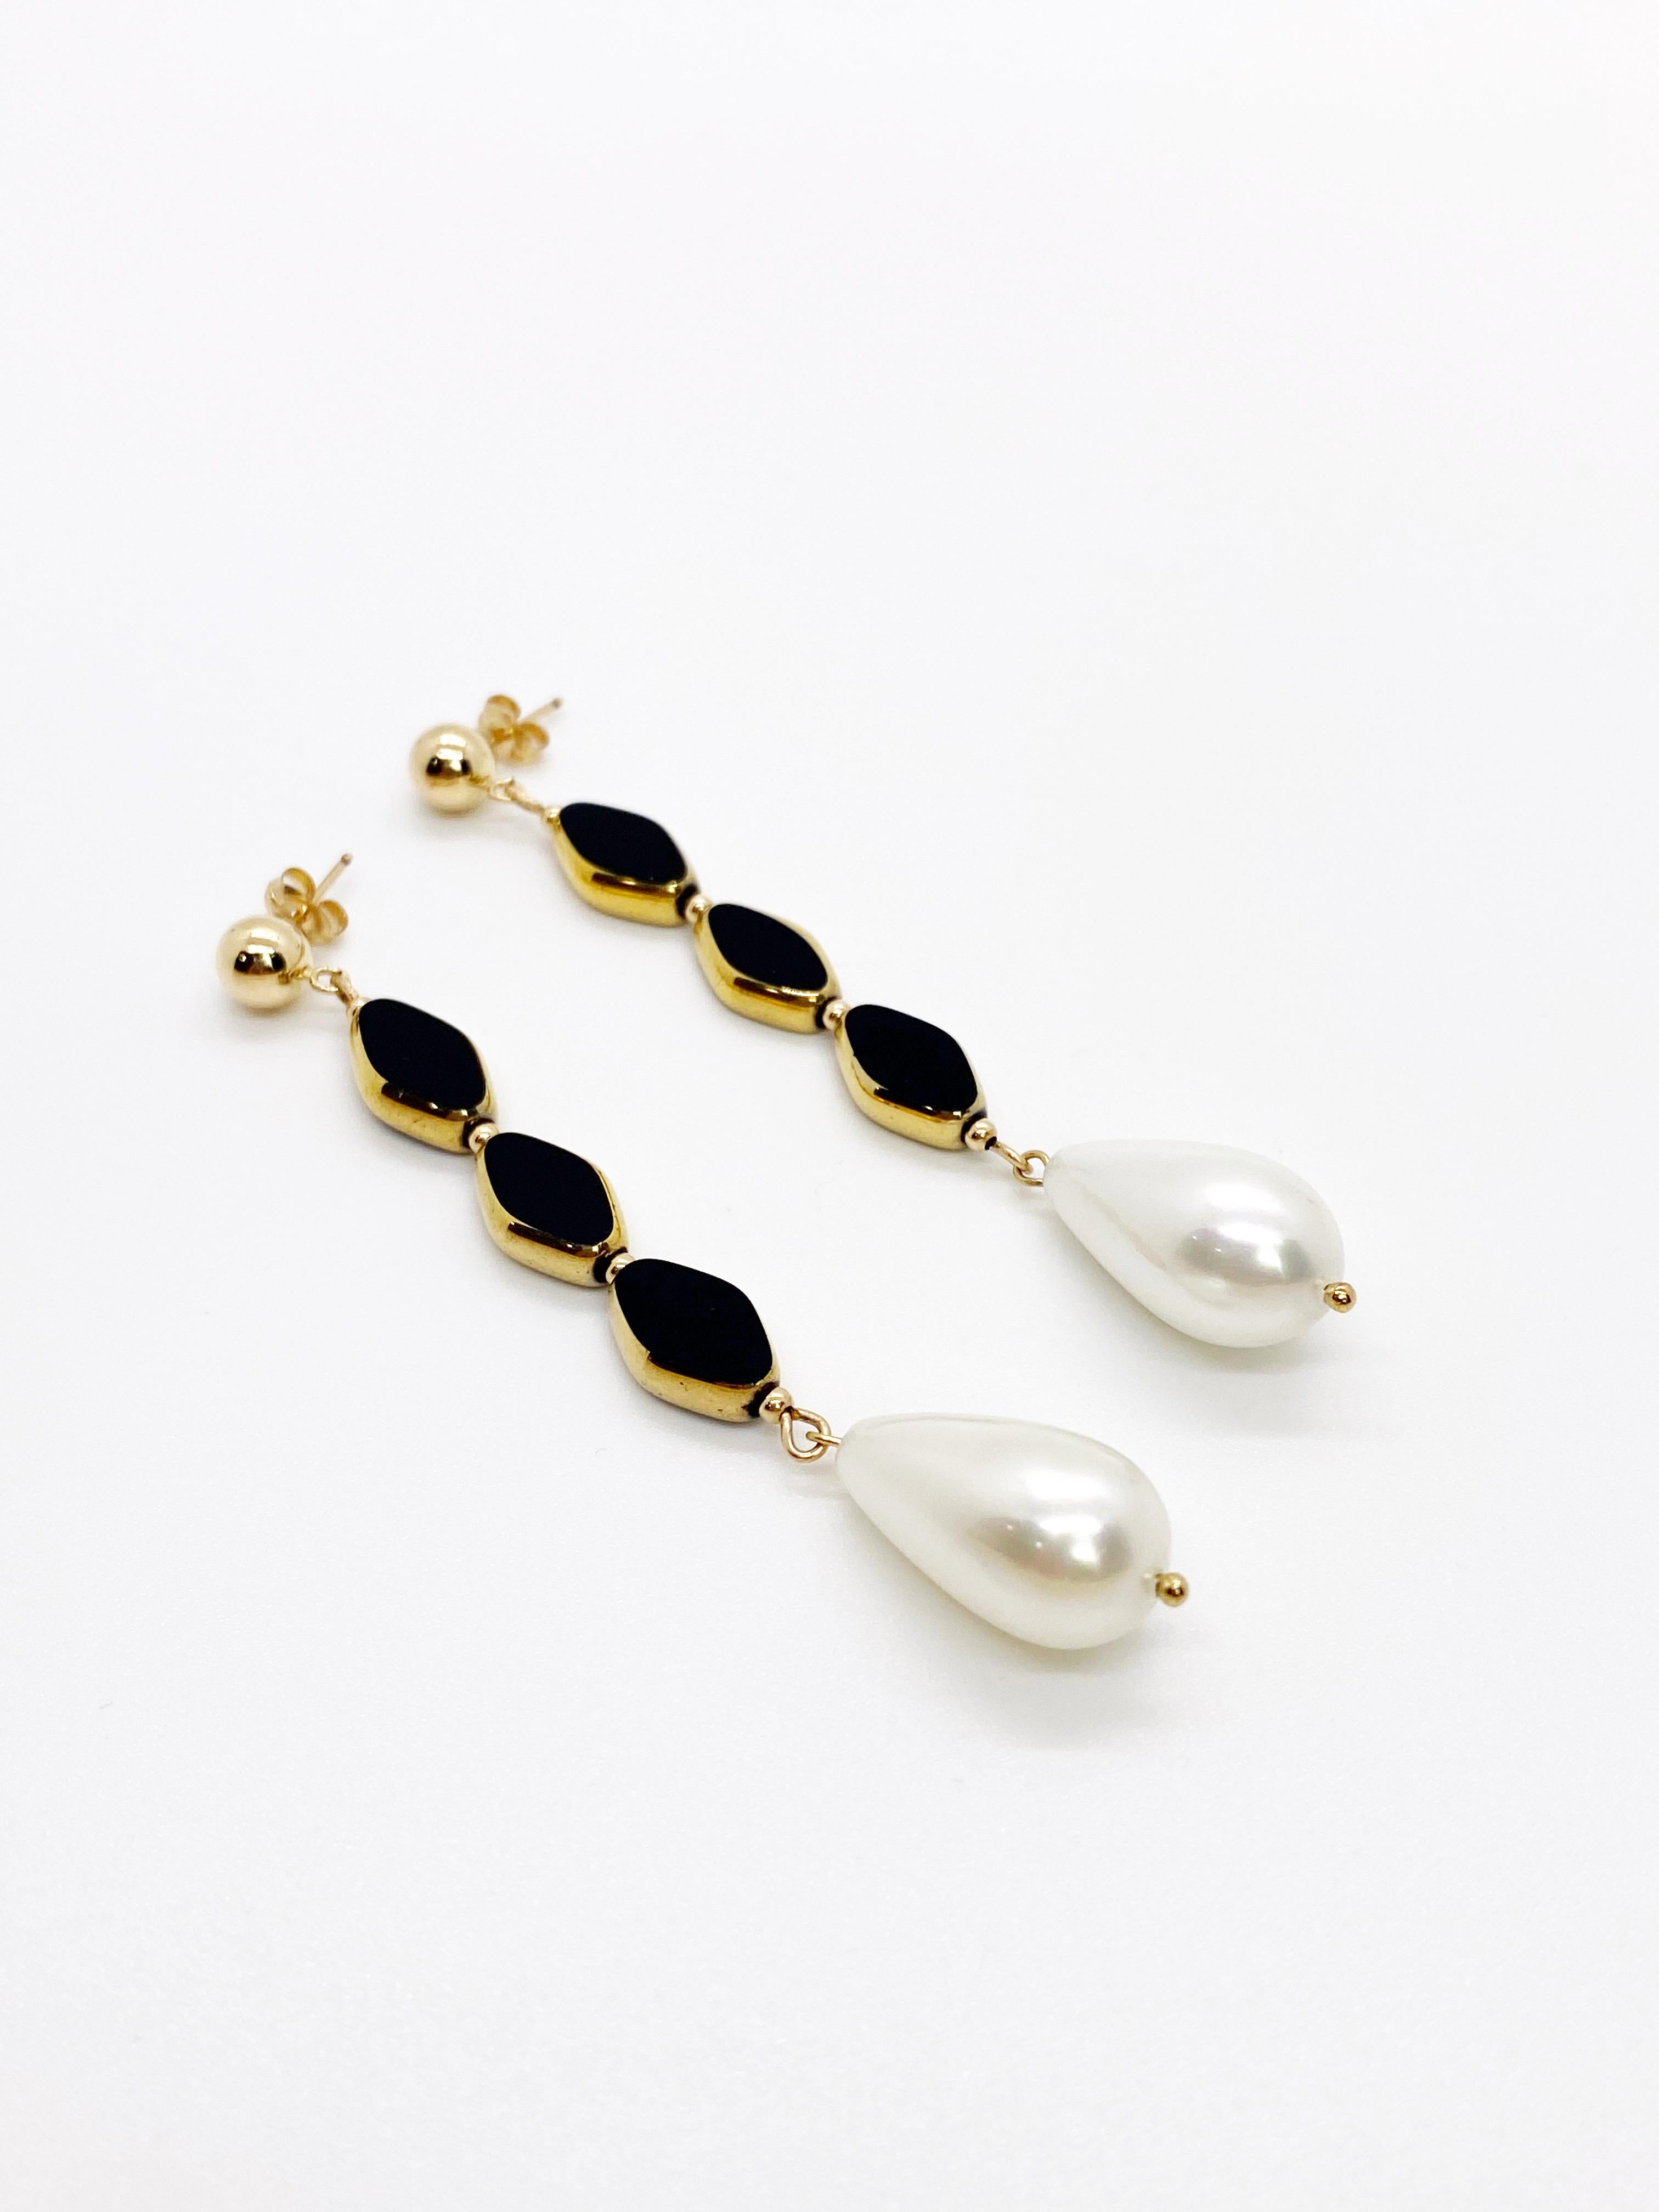 A pair of 3 black opaque colored vintage German glass beads edged with 24K gold and a beautiful south sea pearl dangles at the end. A 14K gold-filled stud to finish the earring.

The 24K gold-edged vintage German glass beads (circa 1920s-1960s) are